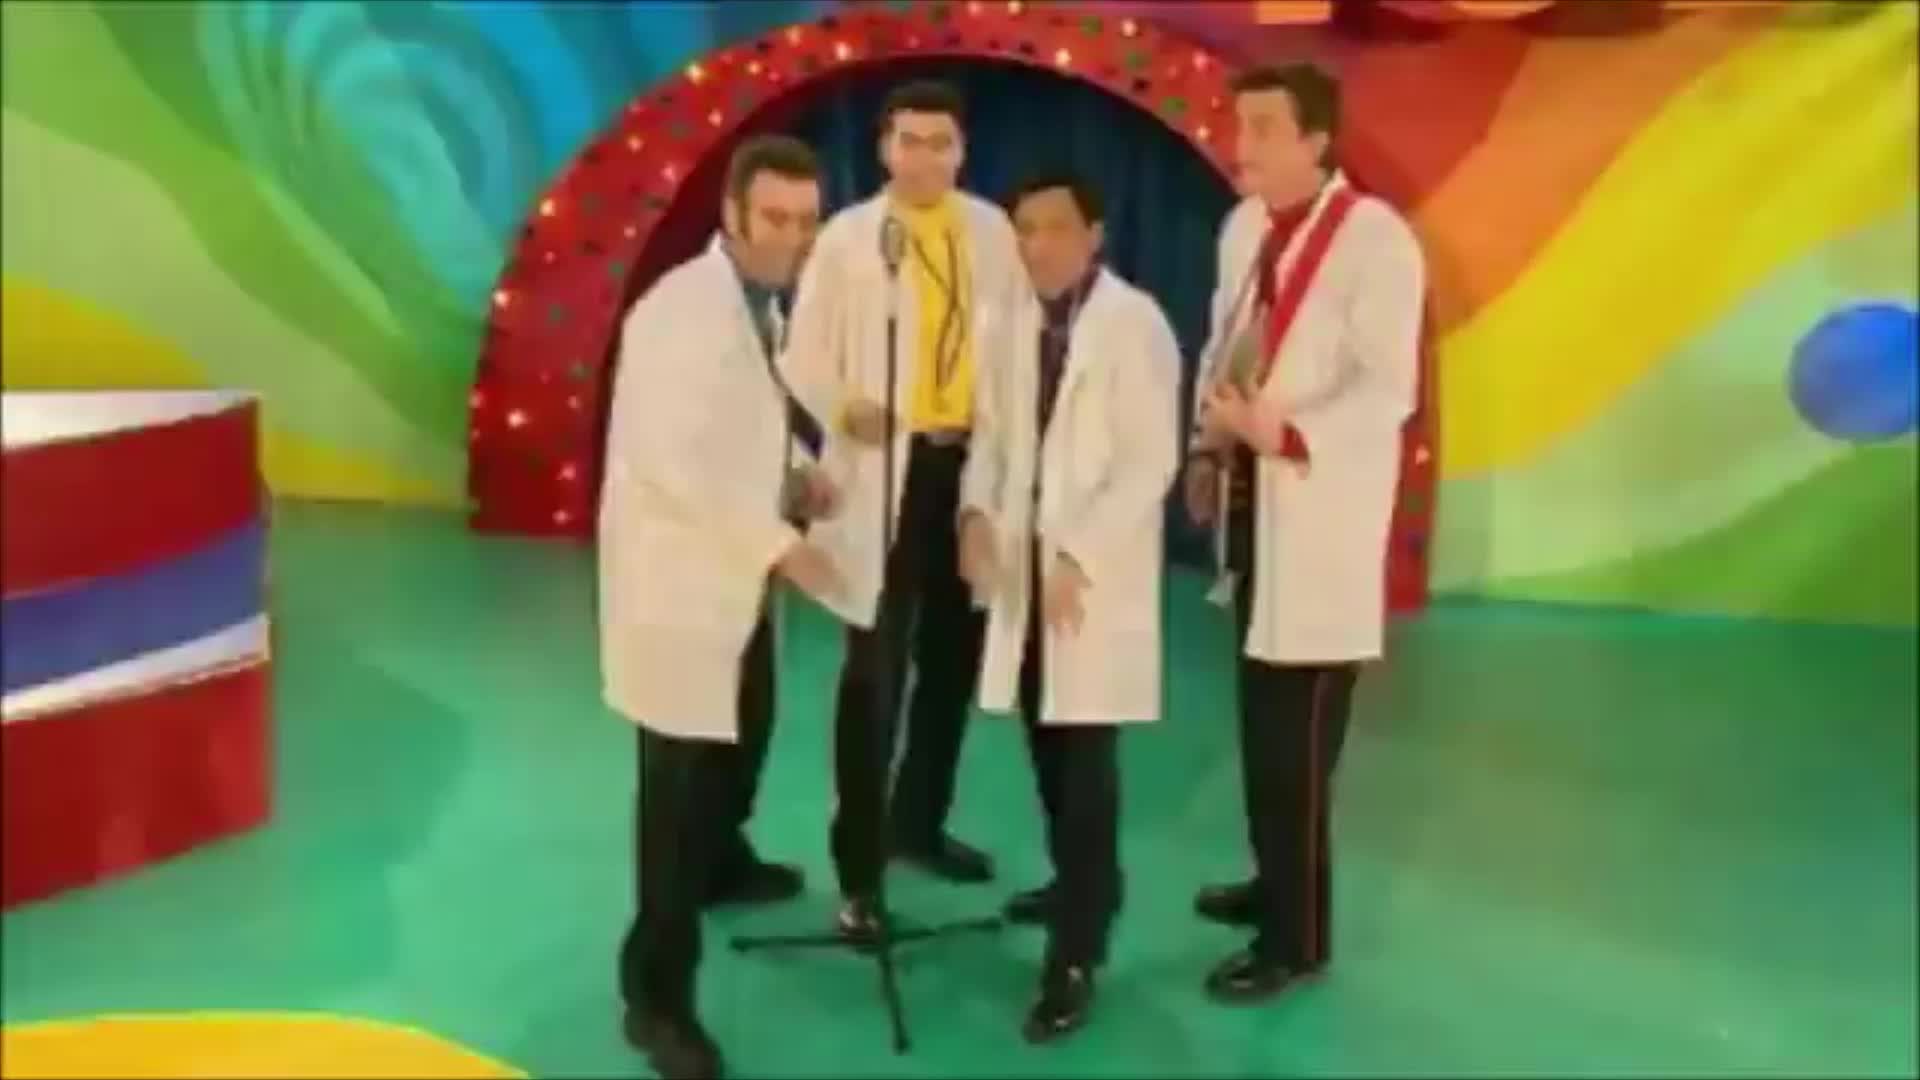 THE WIGGLES GONE WRONG